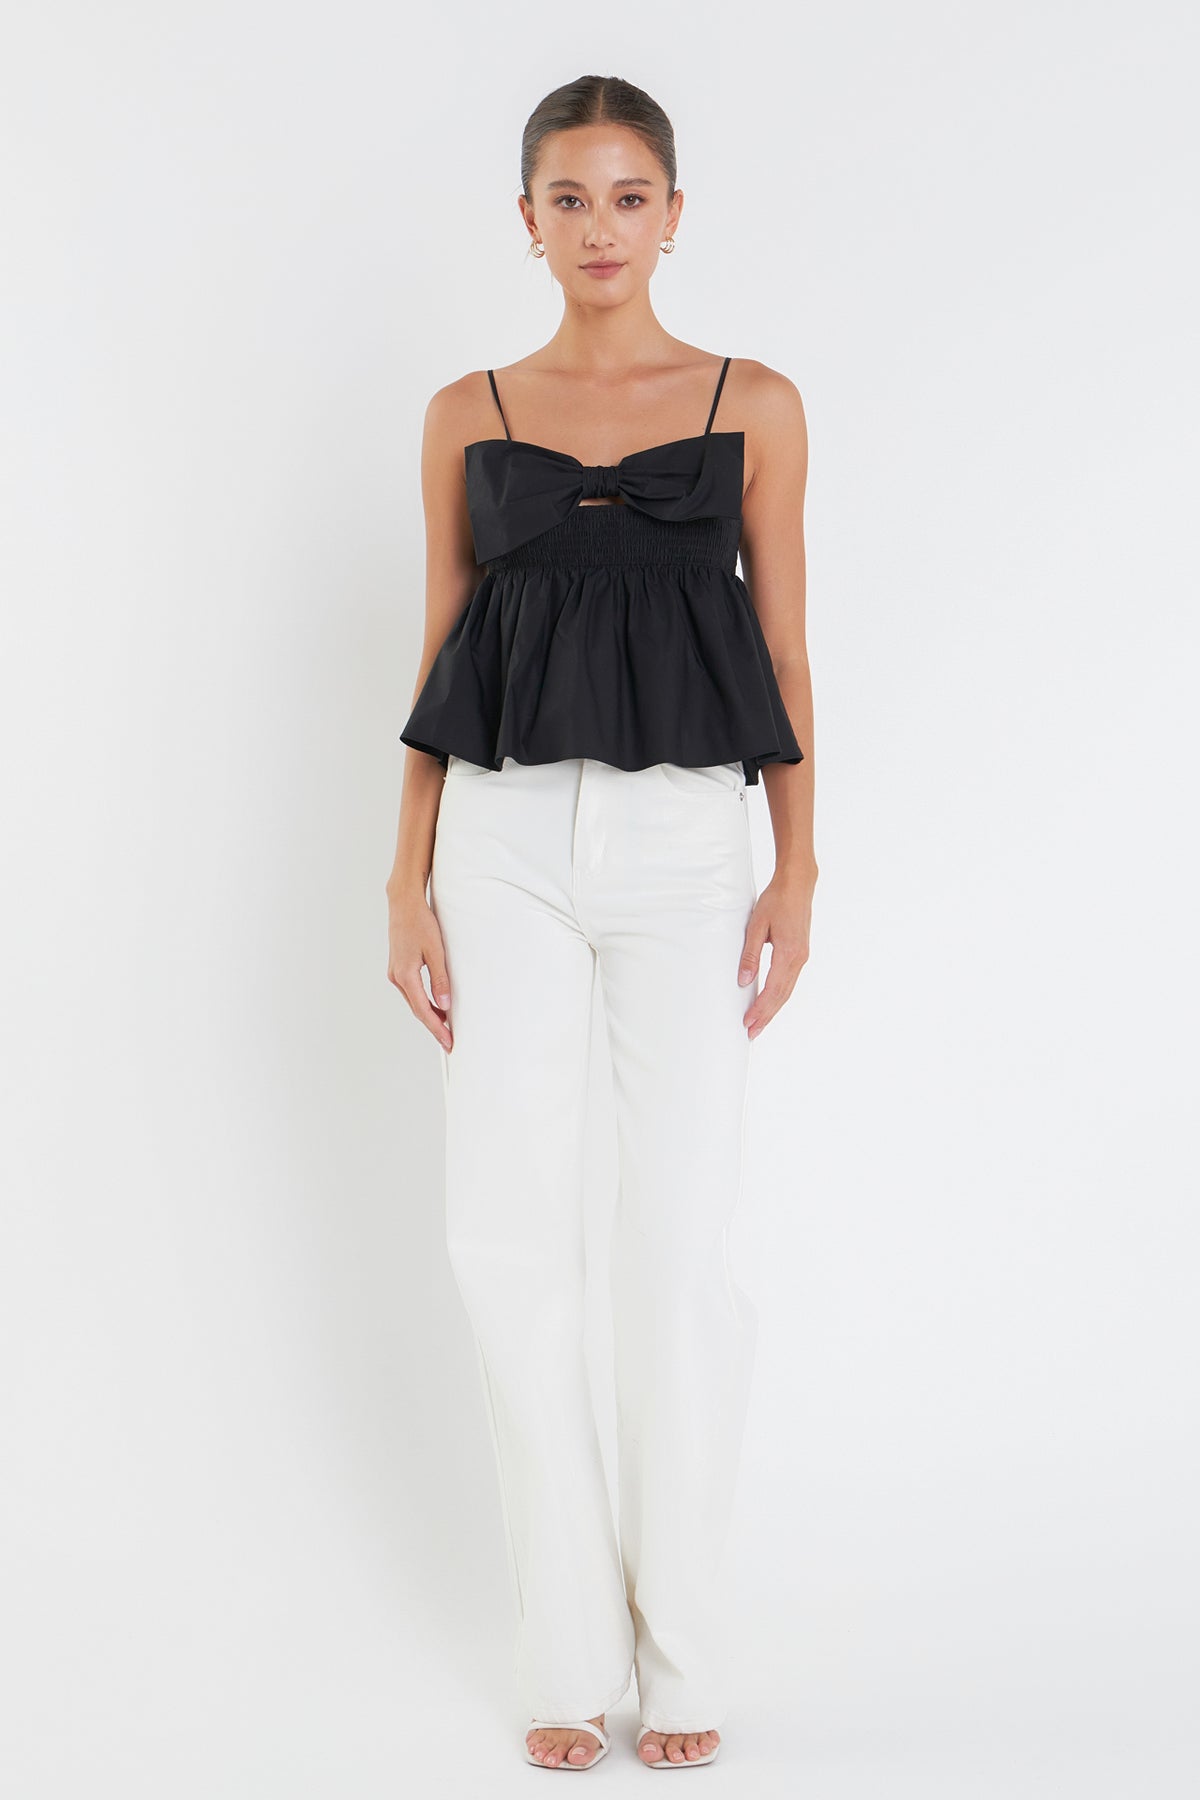 ENGLISH FACTORY - Bow Peplum Top - TOPS available at Objectrare